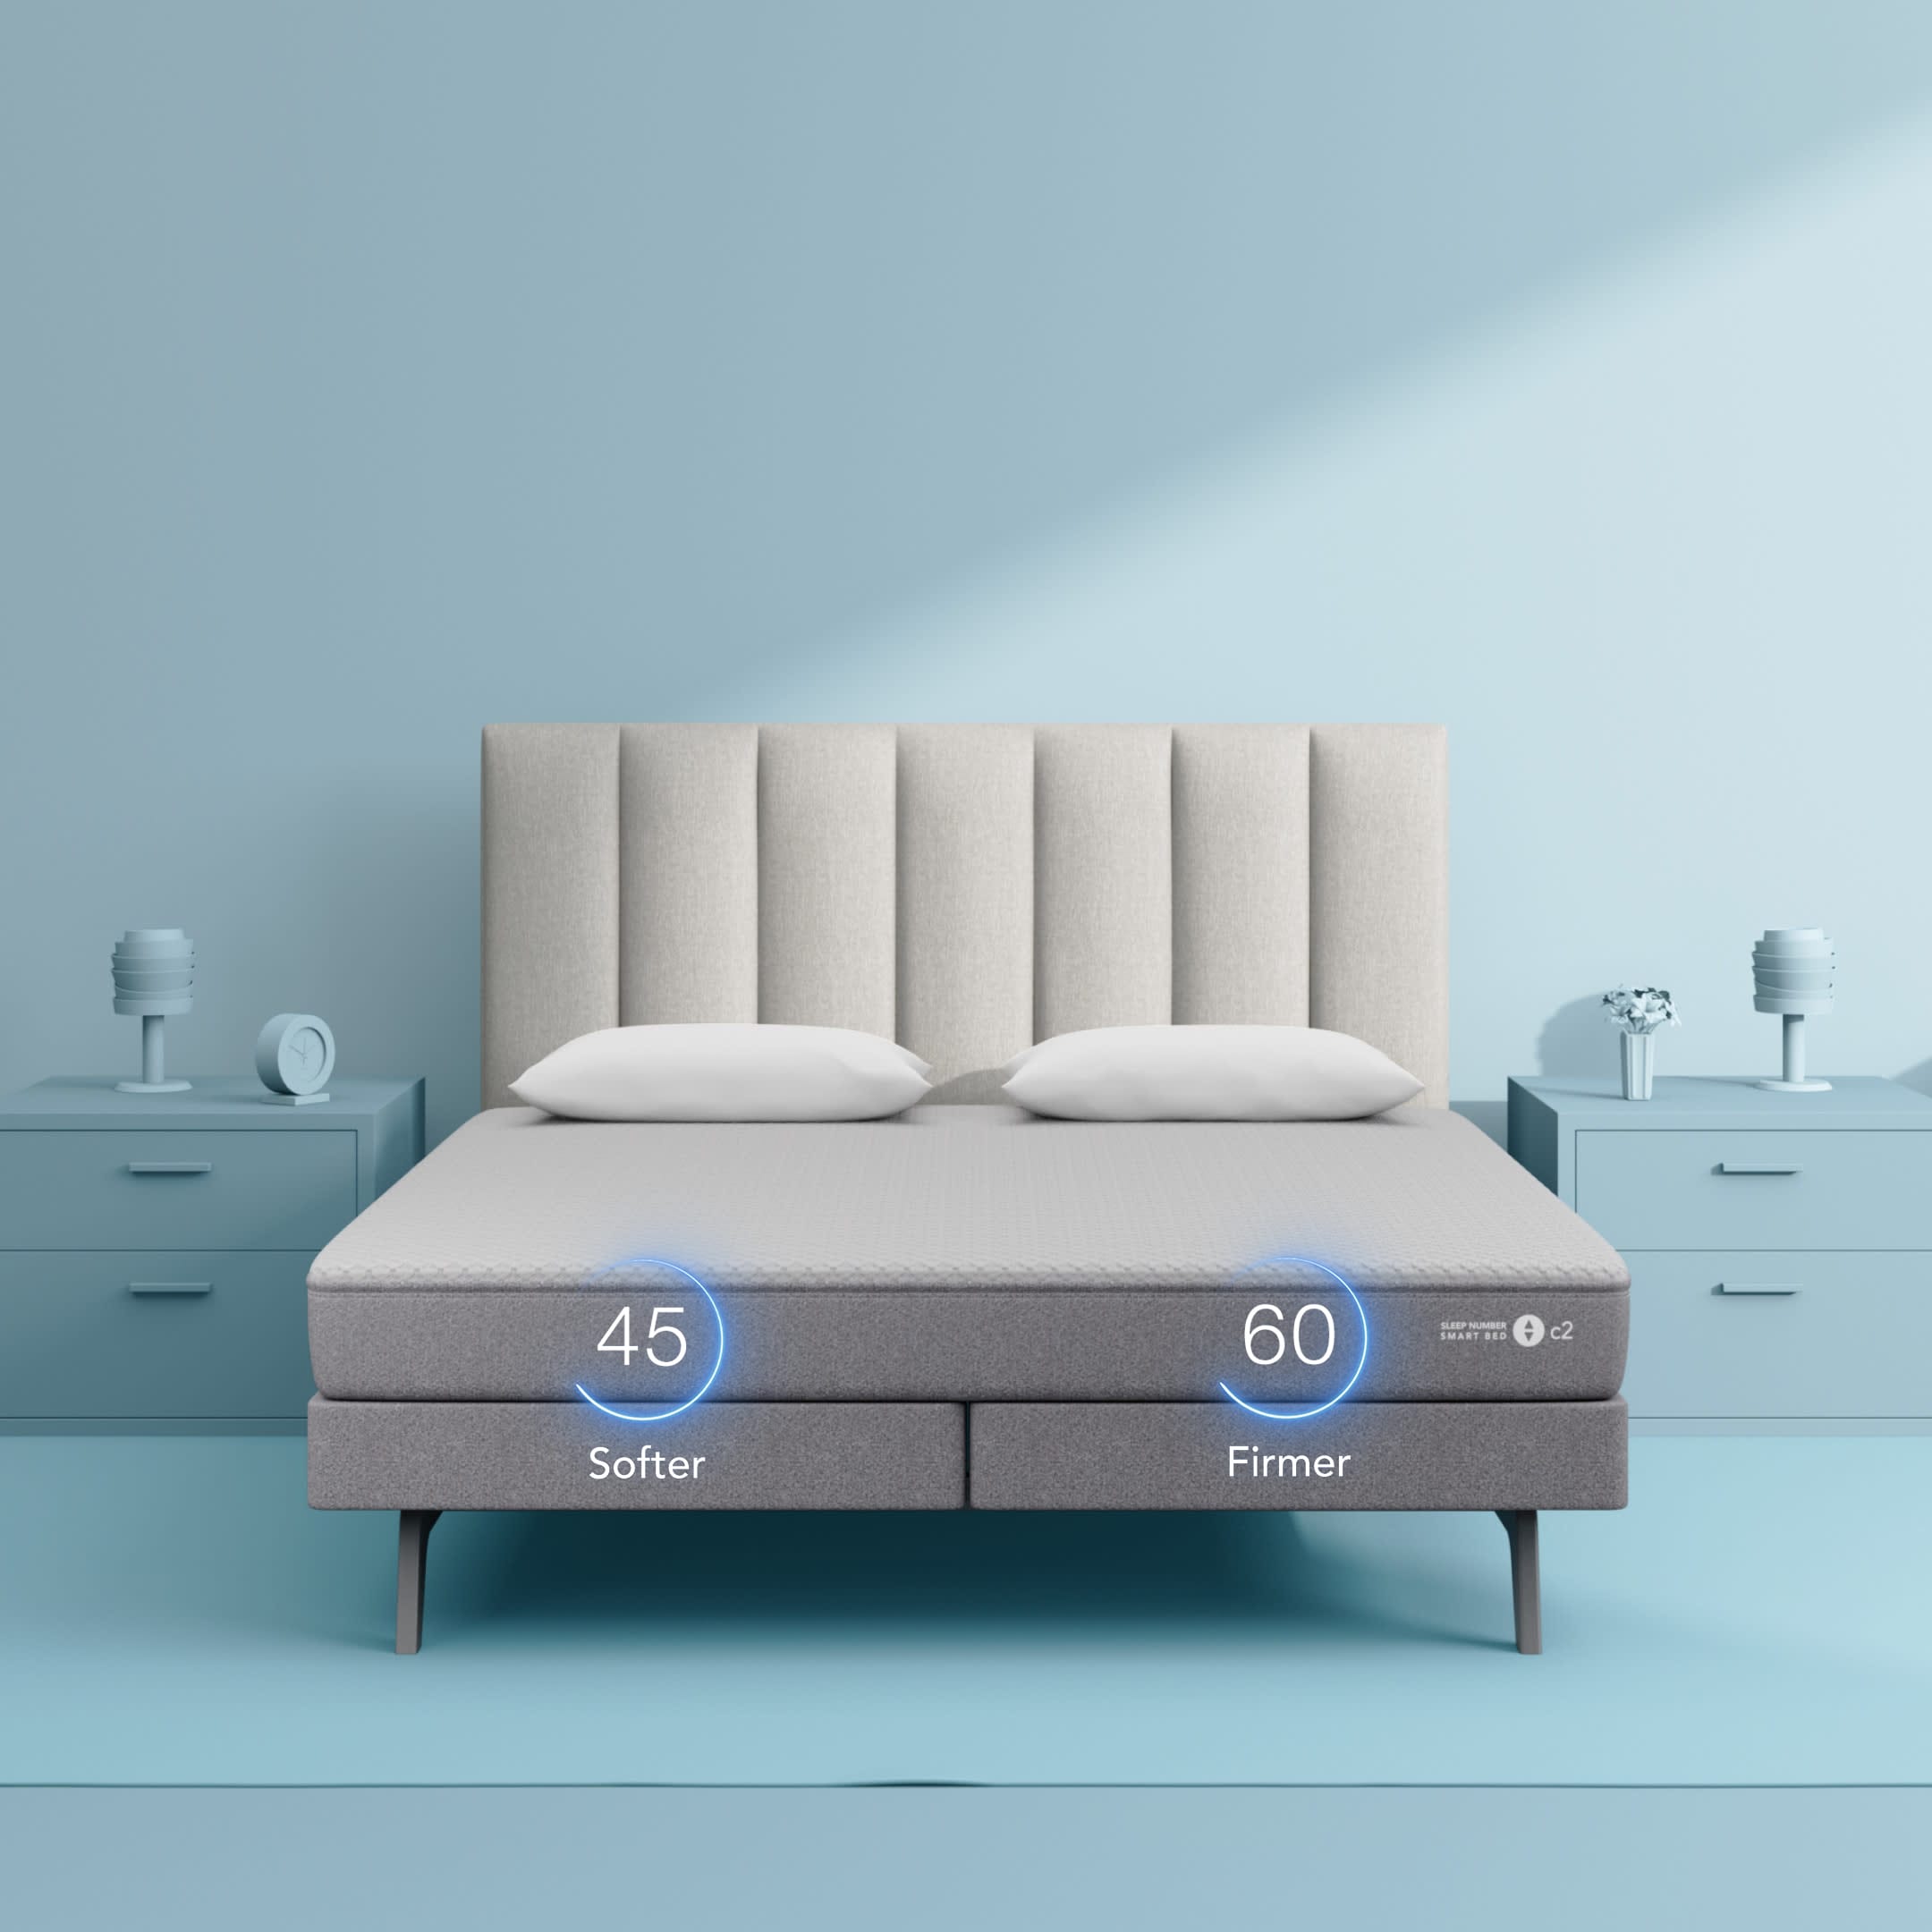 https://cdn.sleepnumber.com/image/upload/f_auto,q_auto:eco/v1695047525/workarea/catalog/product_images/c2/c2_1080_Gallery_Front_Numbers